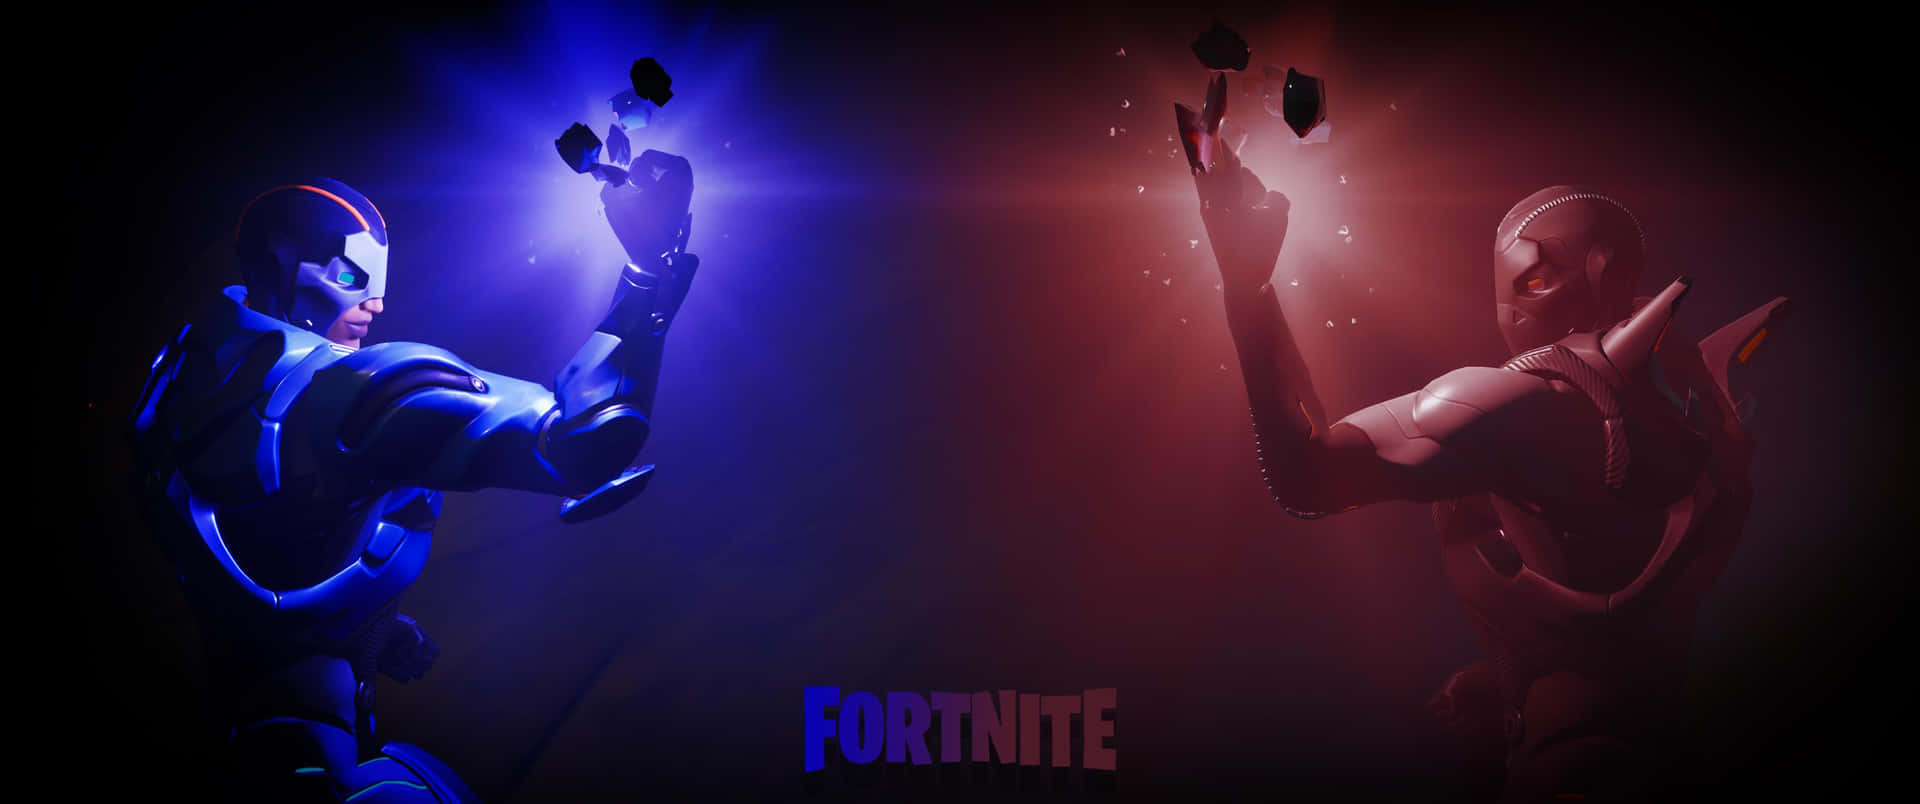 A Deep Dive Into Fortnite on Laptop Wallpaper